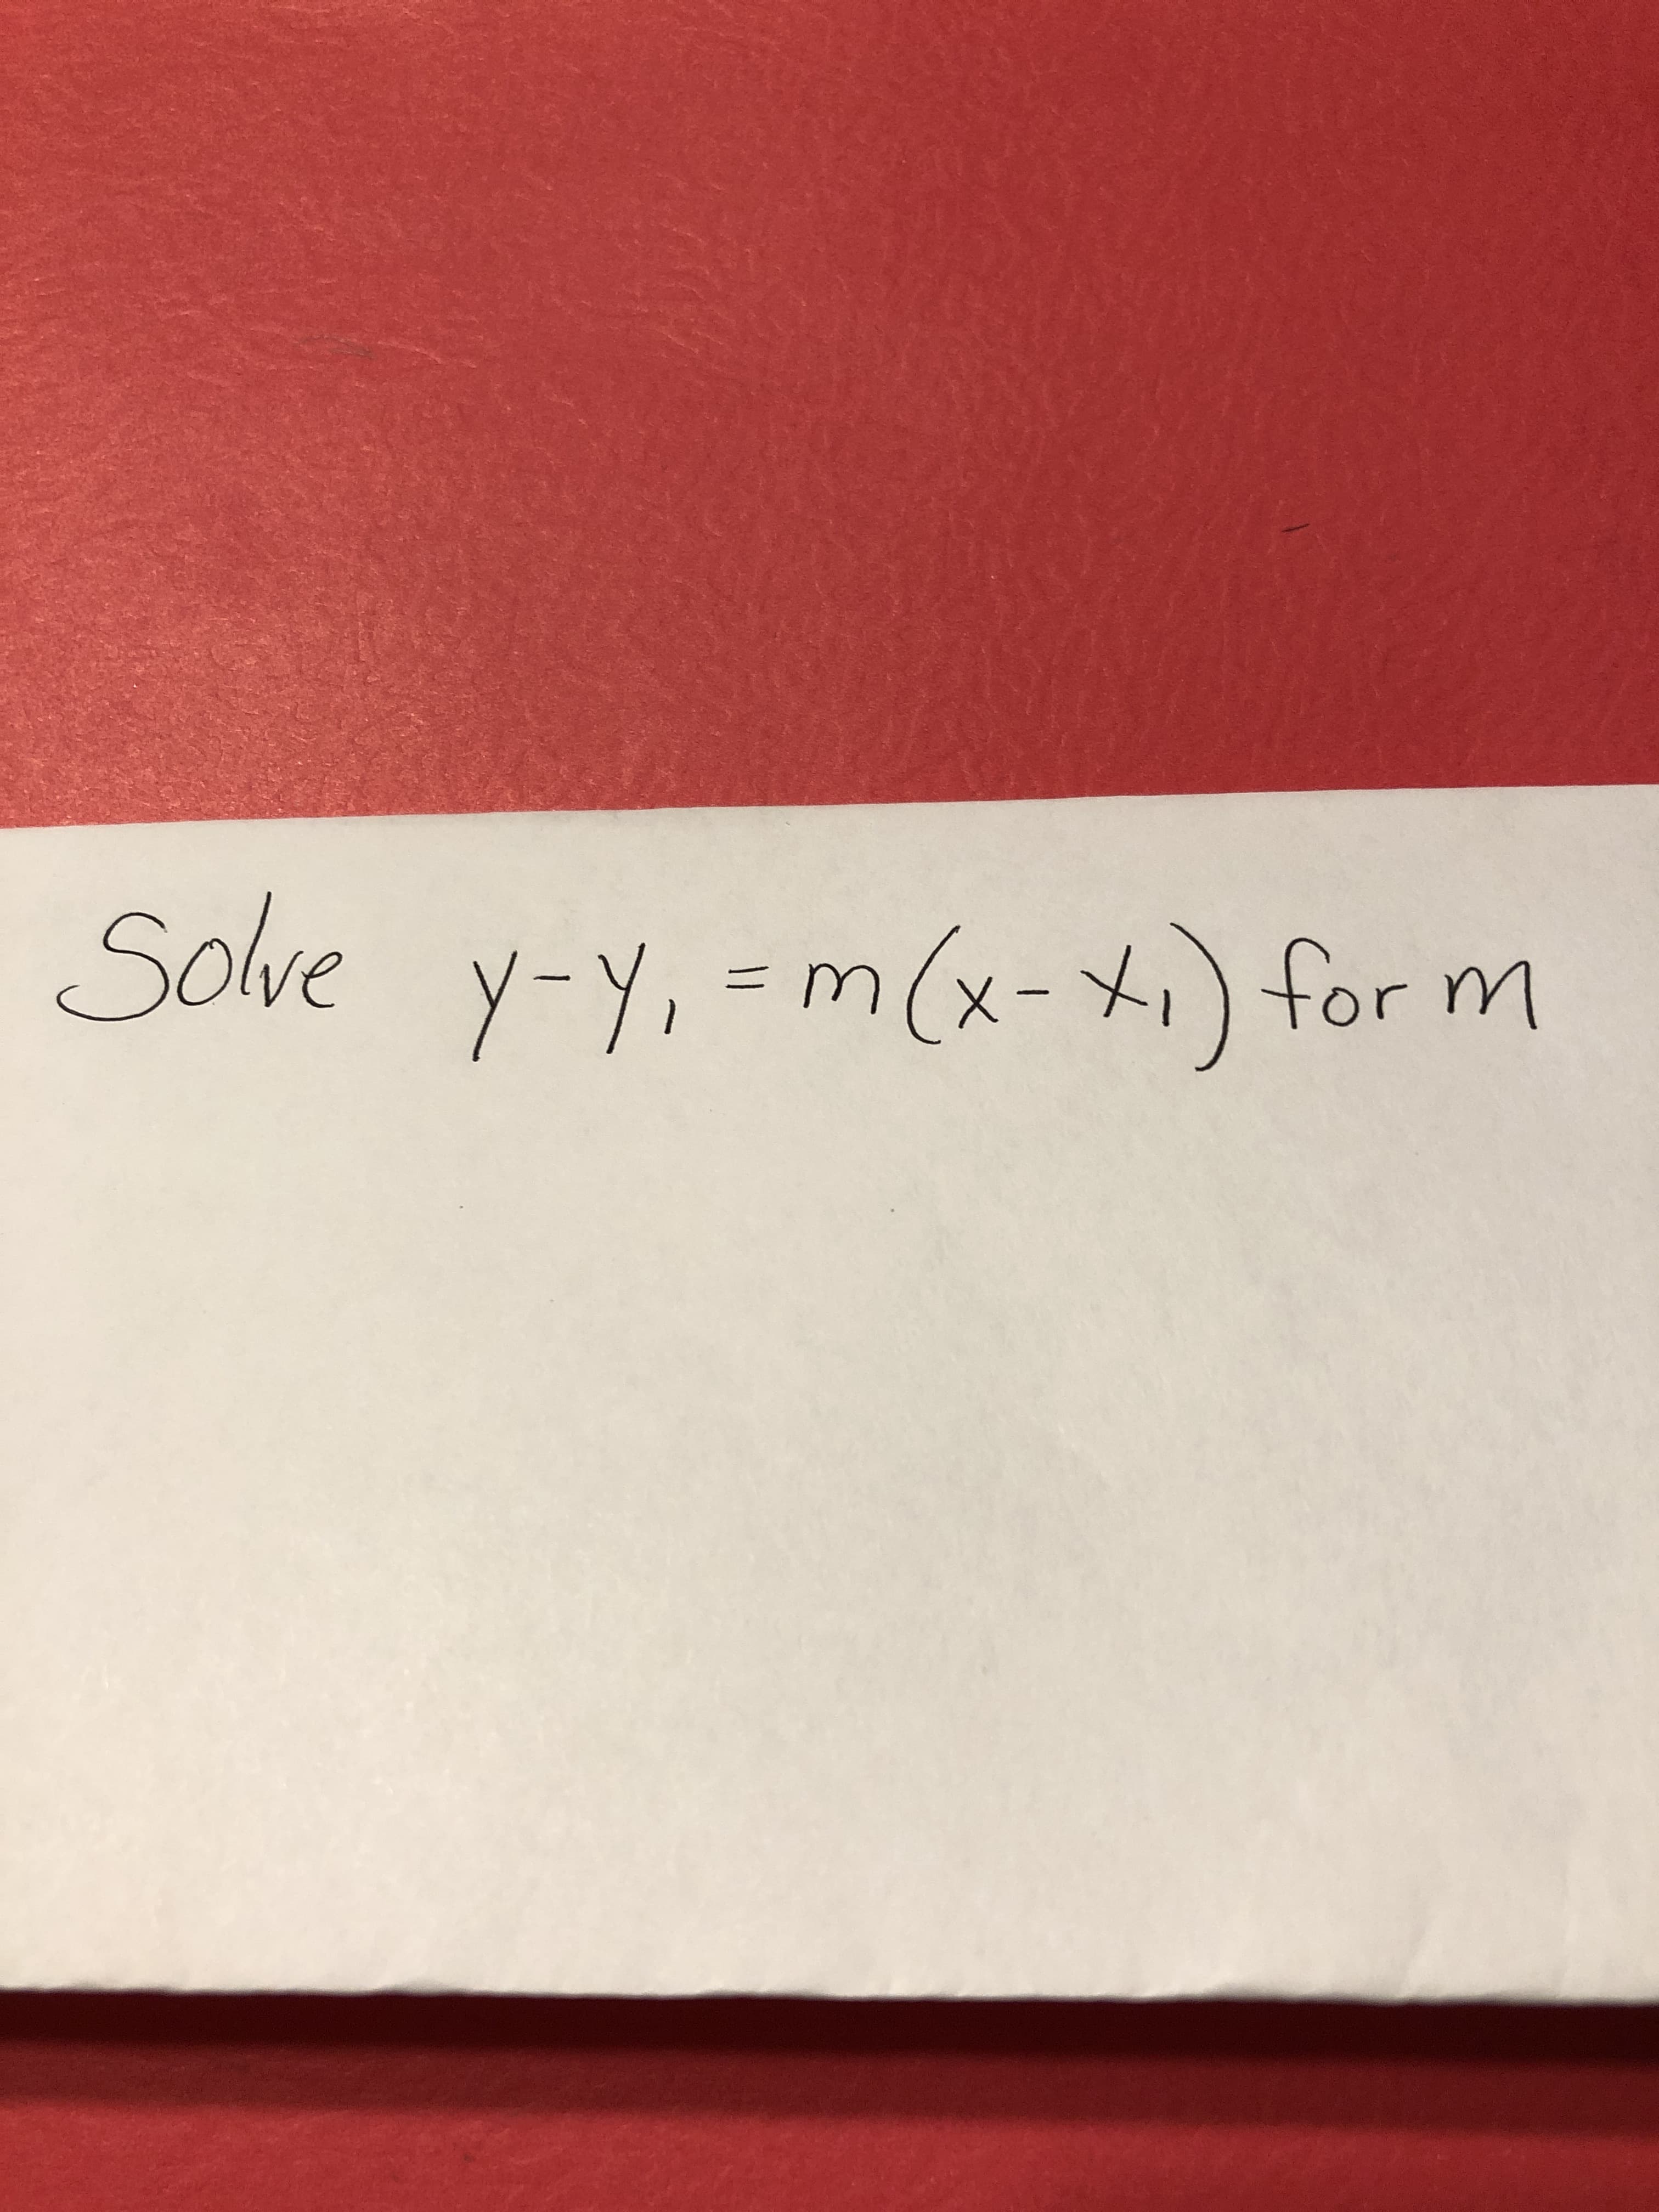 Solve
y-y, = m (x-) for m
